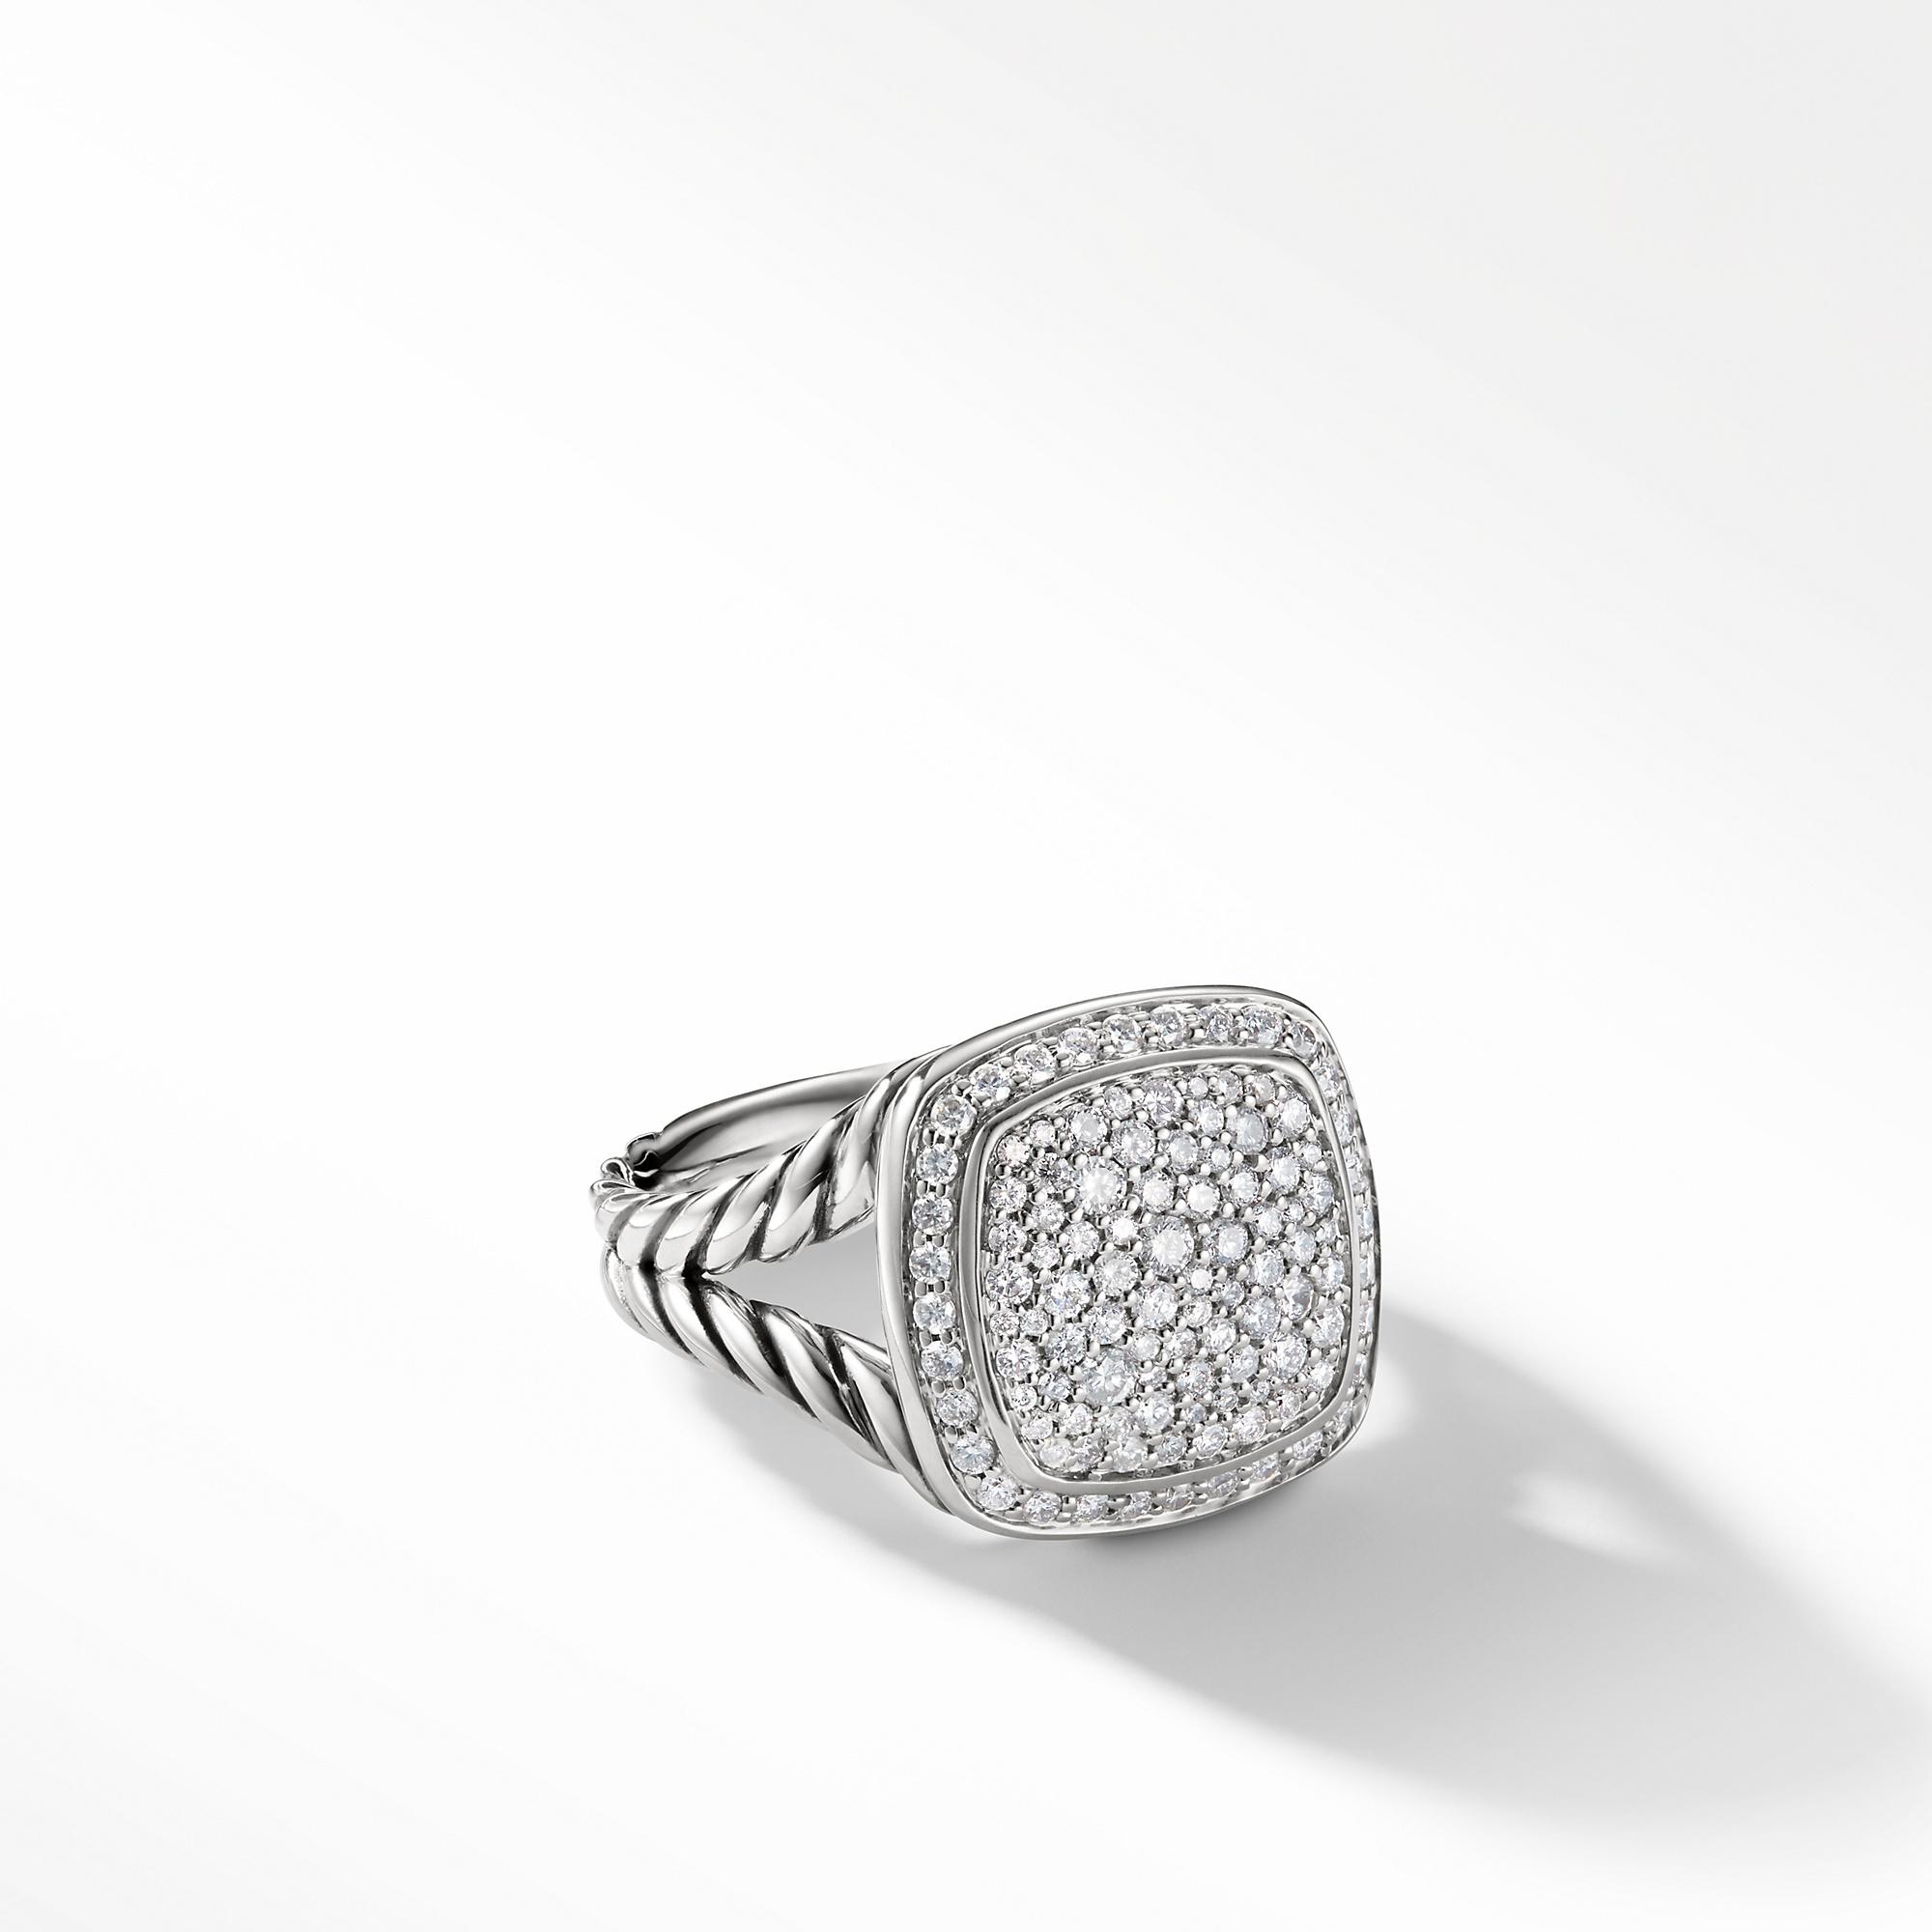 David Yurman 11mm Albion Ring in Sterling Silver with Pave Diamonds, size 6